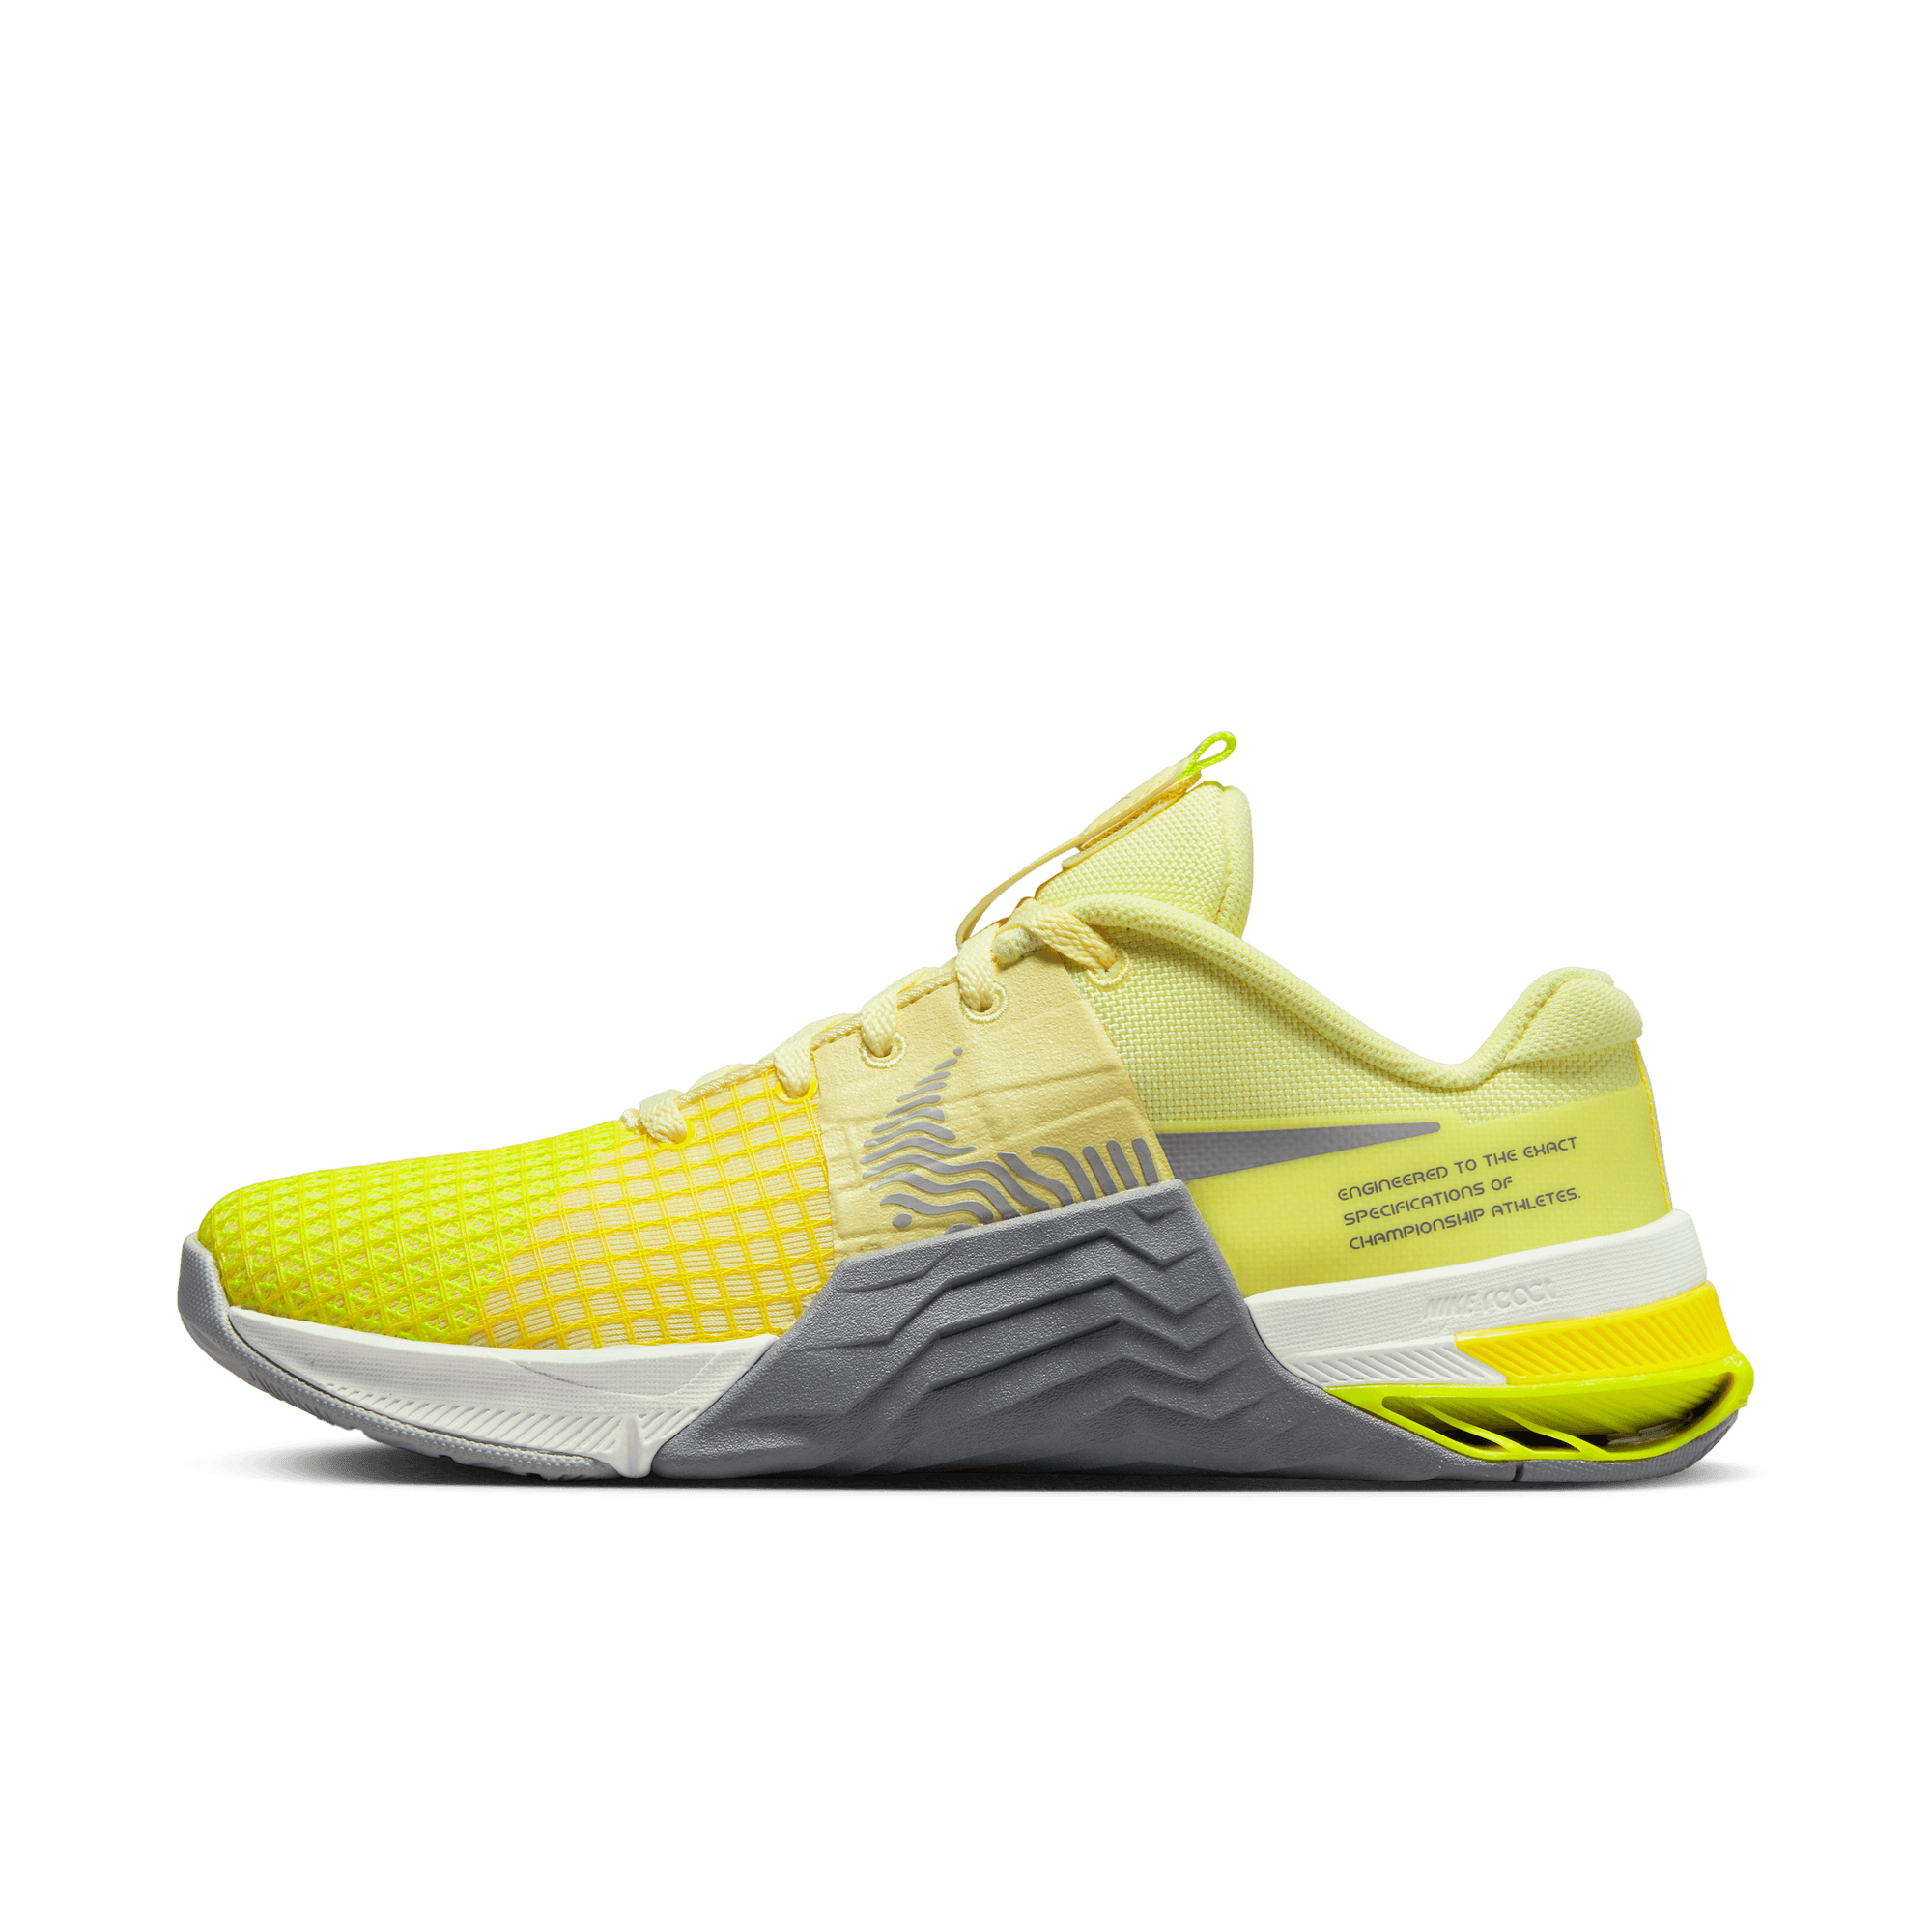 Nike Metcon Women's Training Shoes in Light Yellow and Grey - WIT Fitness